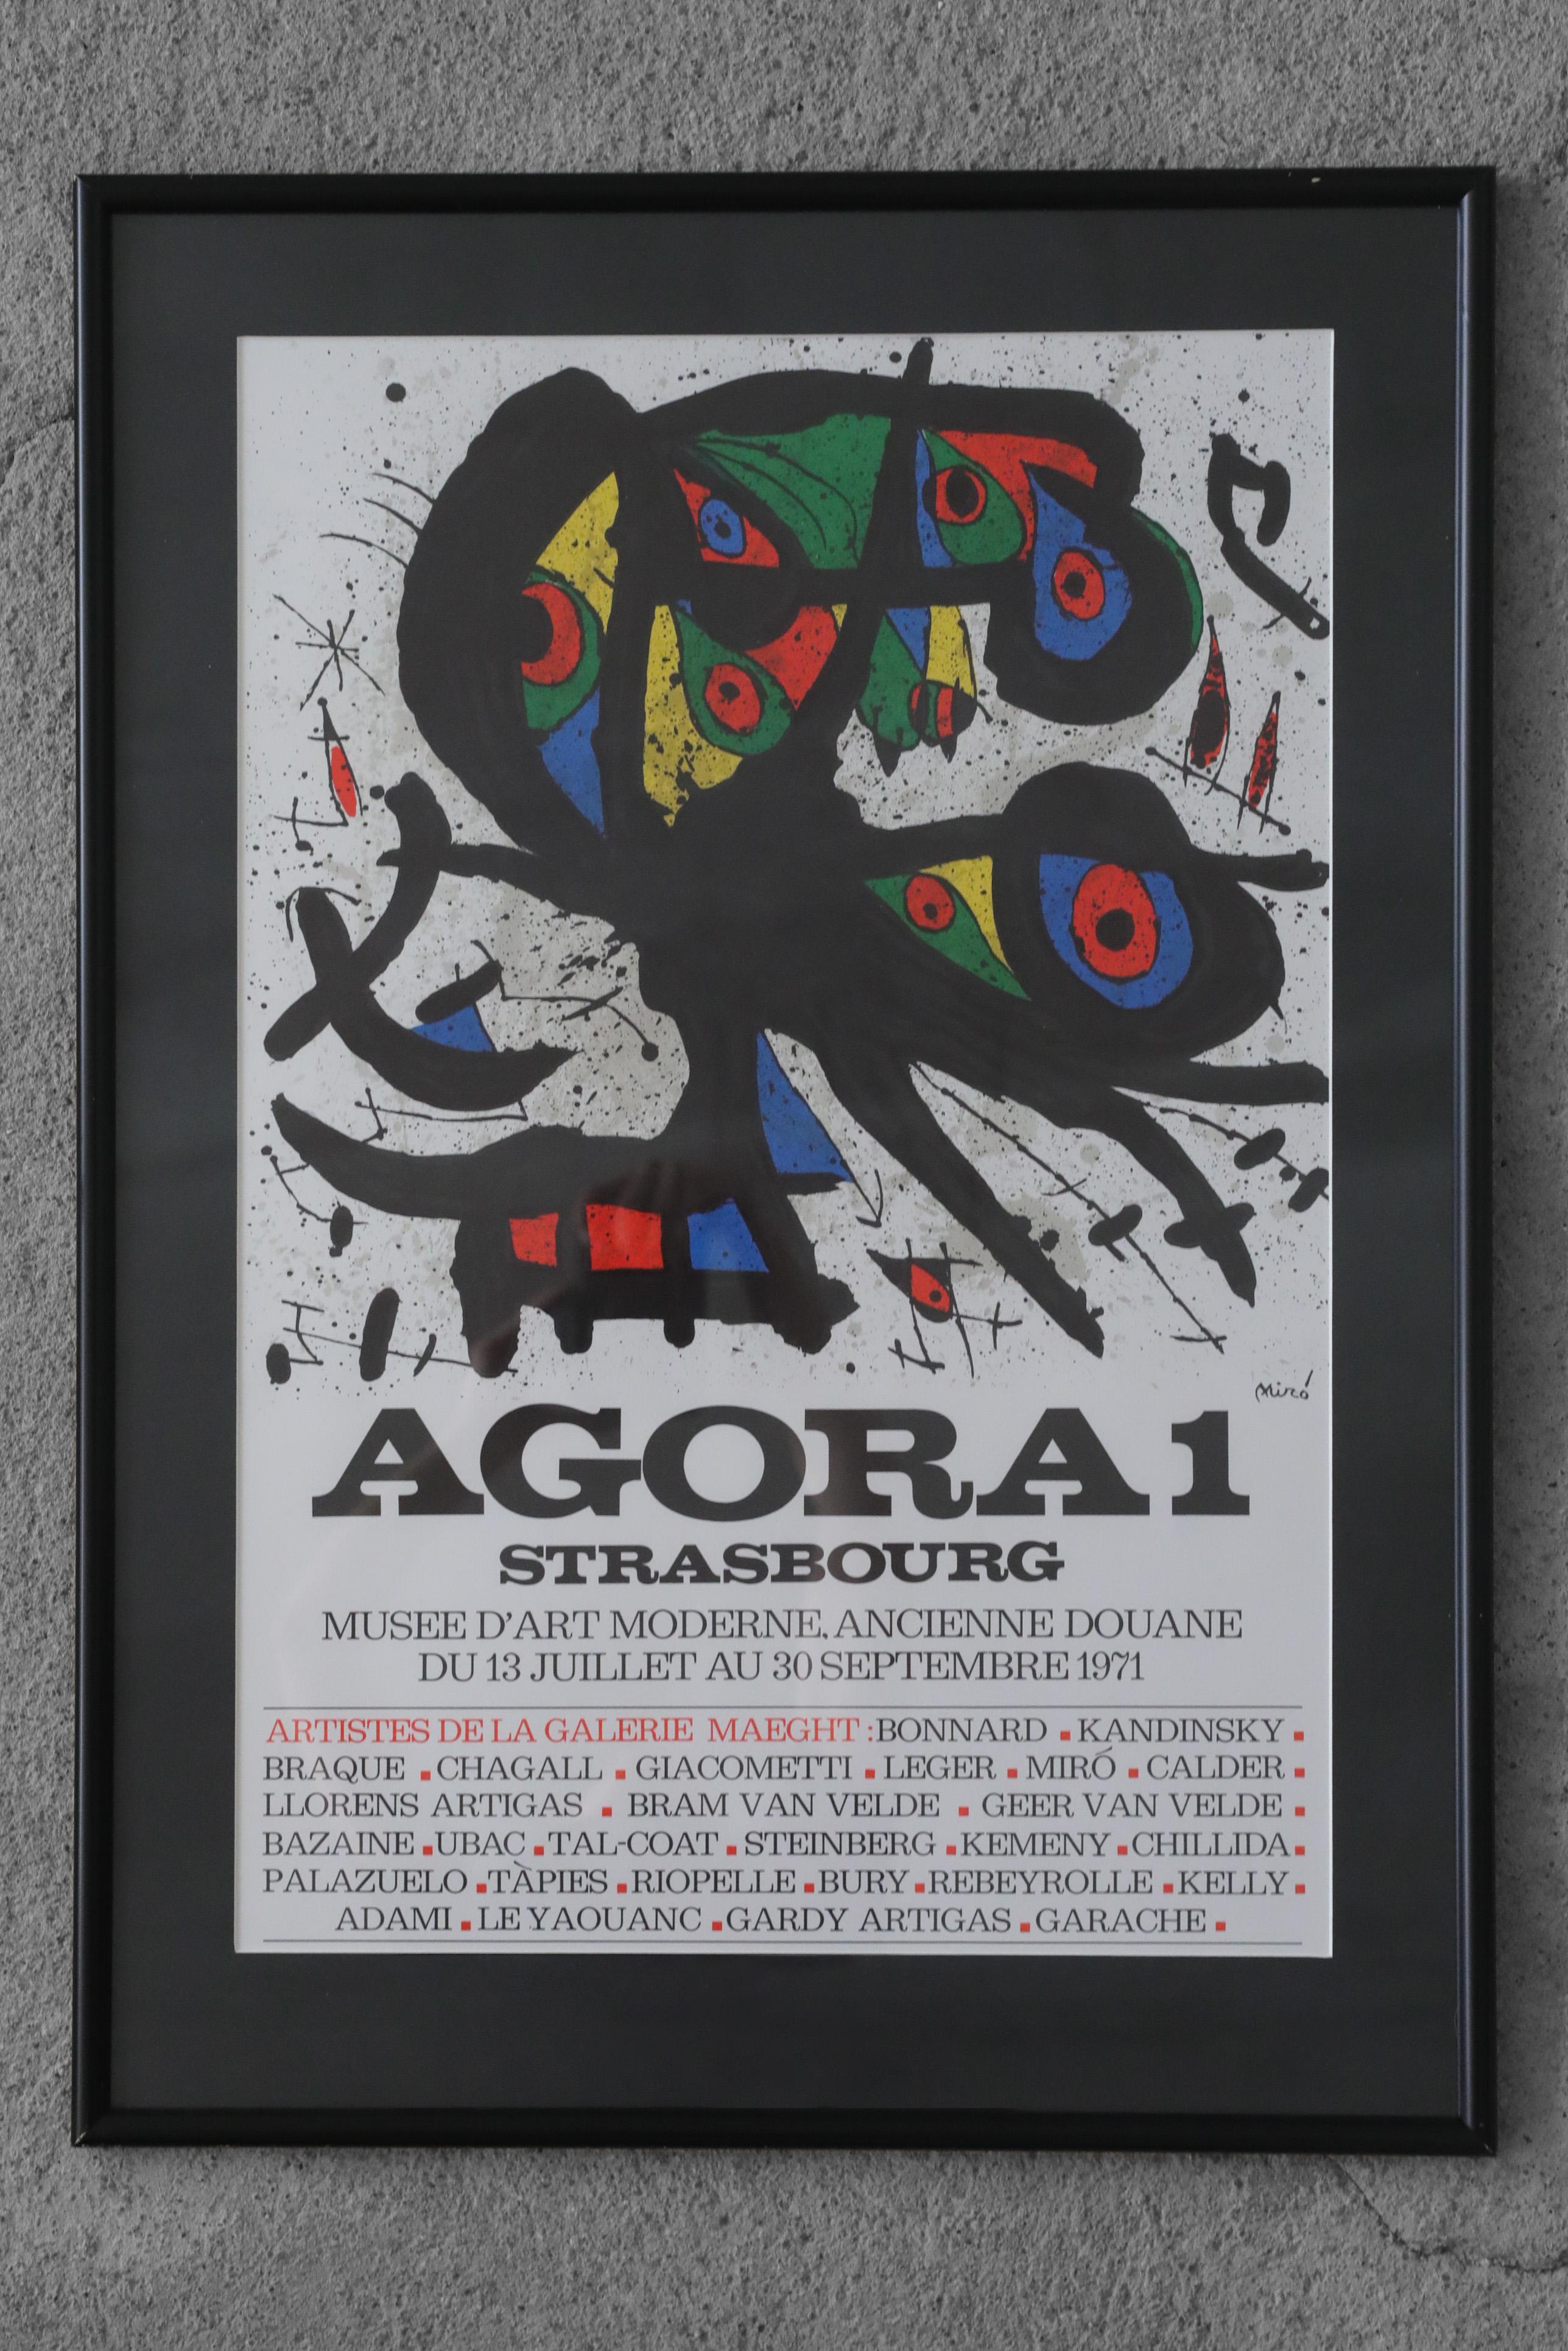 Joan Miró, Agora I, 1971
Color lithography
Work signed by the artist
Working dimensions 71/51
Framed work

Lithographic poster for an exhibition of artists represented by Galeria Maeght at the Musée d'Art Moderne Strasbourg in 1971. Poster by Joan